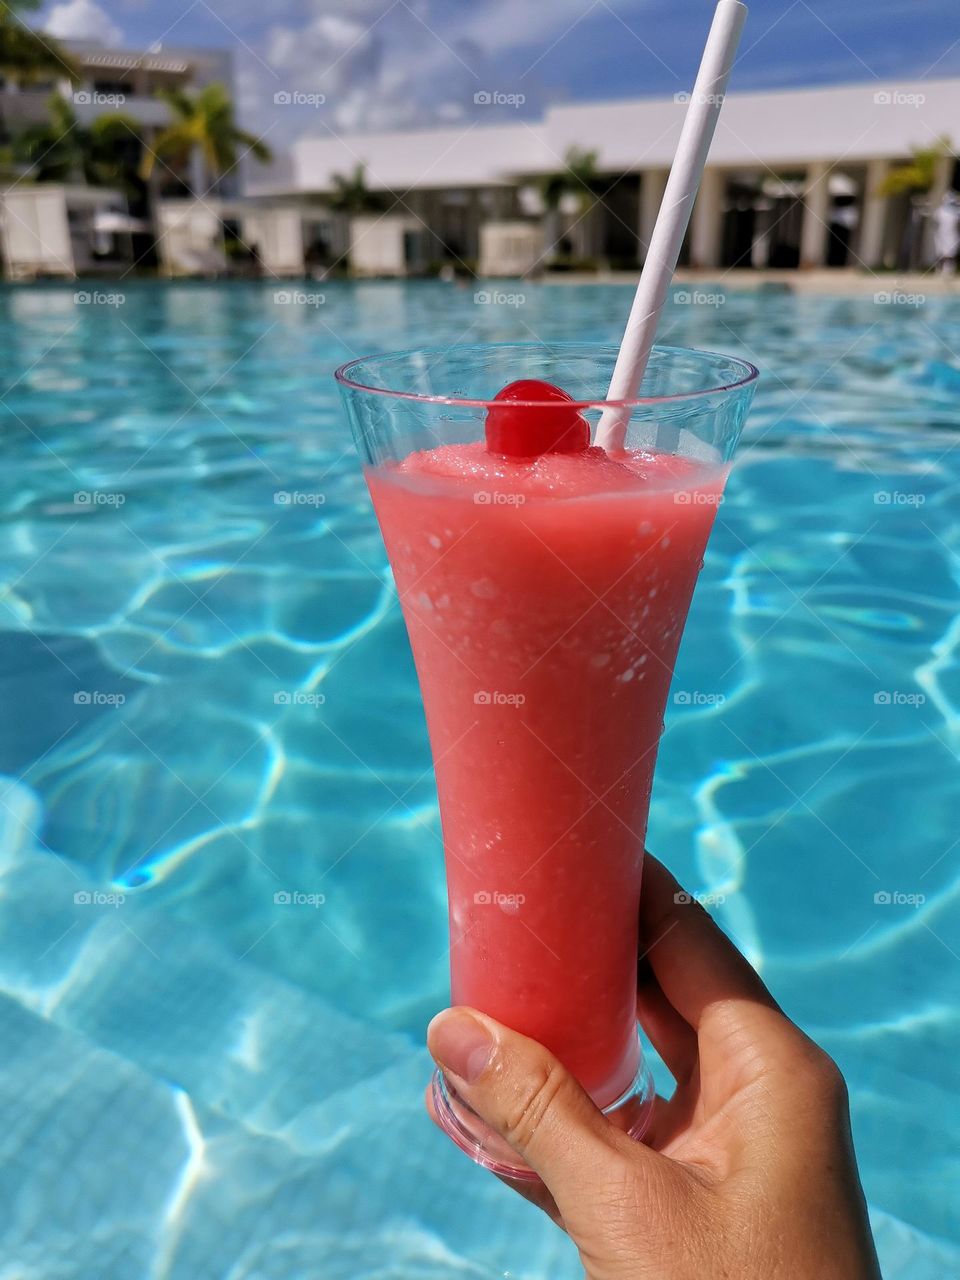 Liquids are cool. Tasty non-alco cocktail. Relax time. Swimming pool. Summer mood.